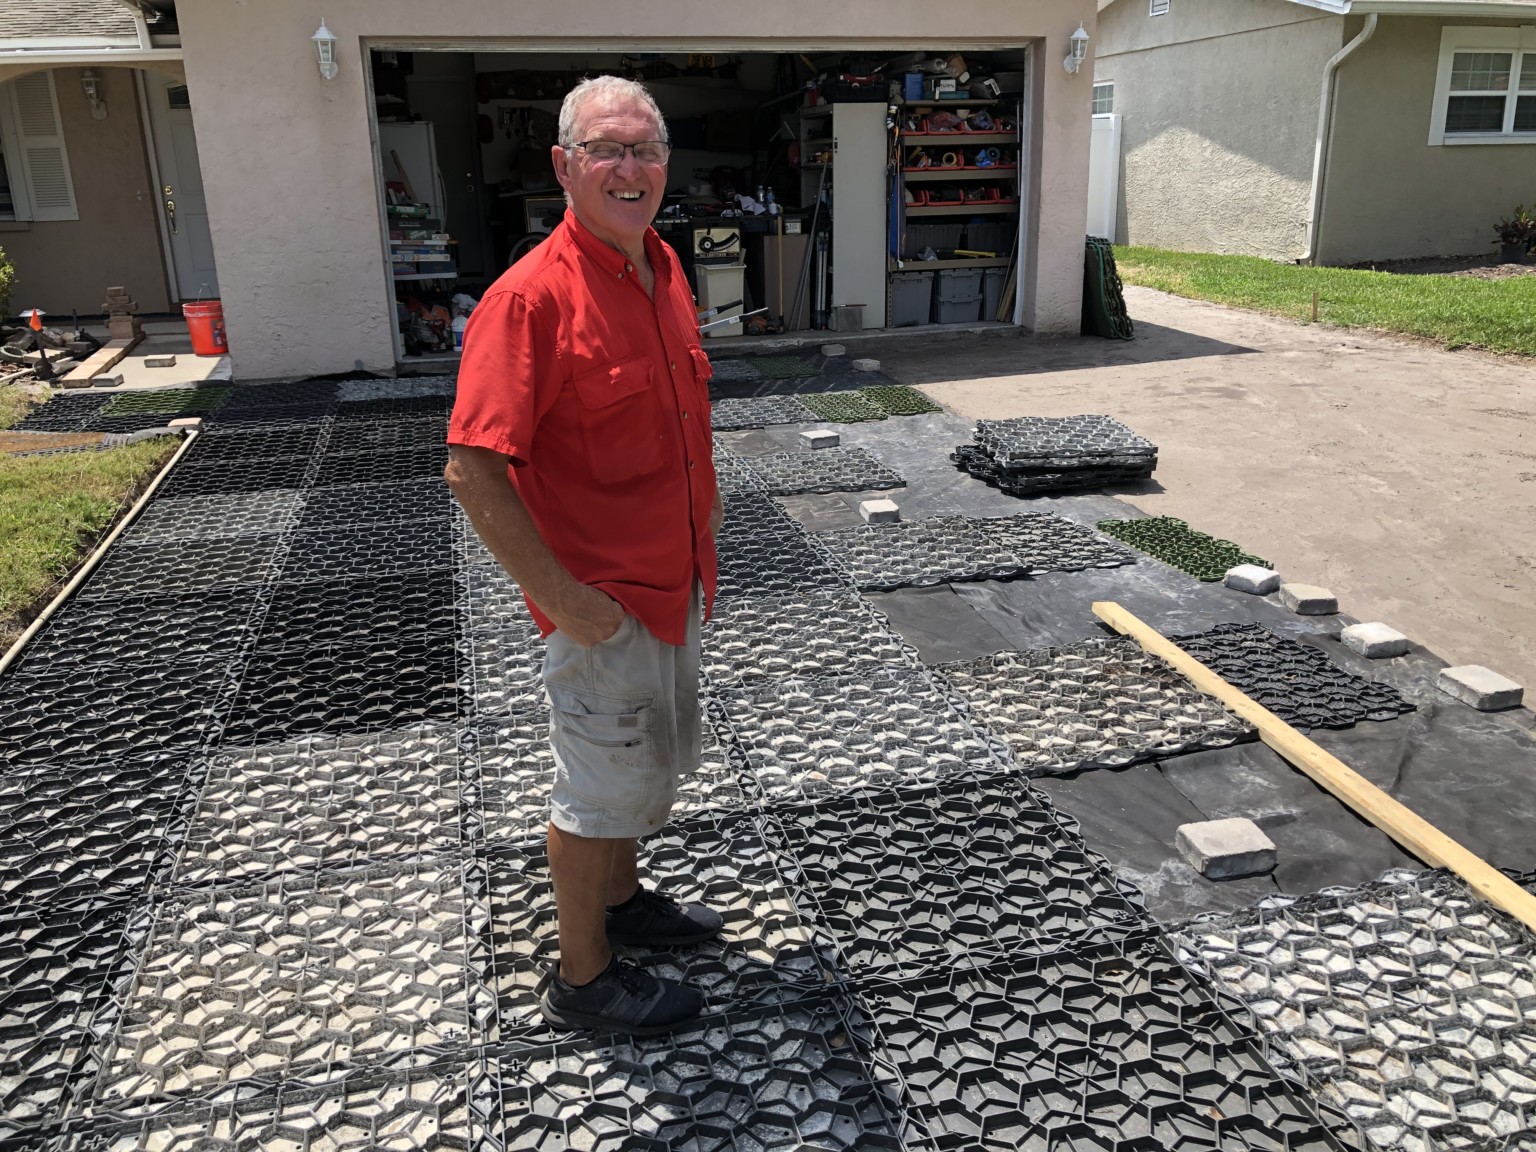 How To Lay Pavers Over Dirt - The Best Method for Patios and Driveways